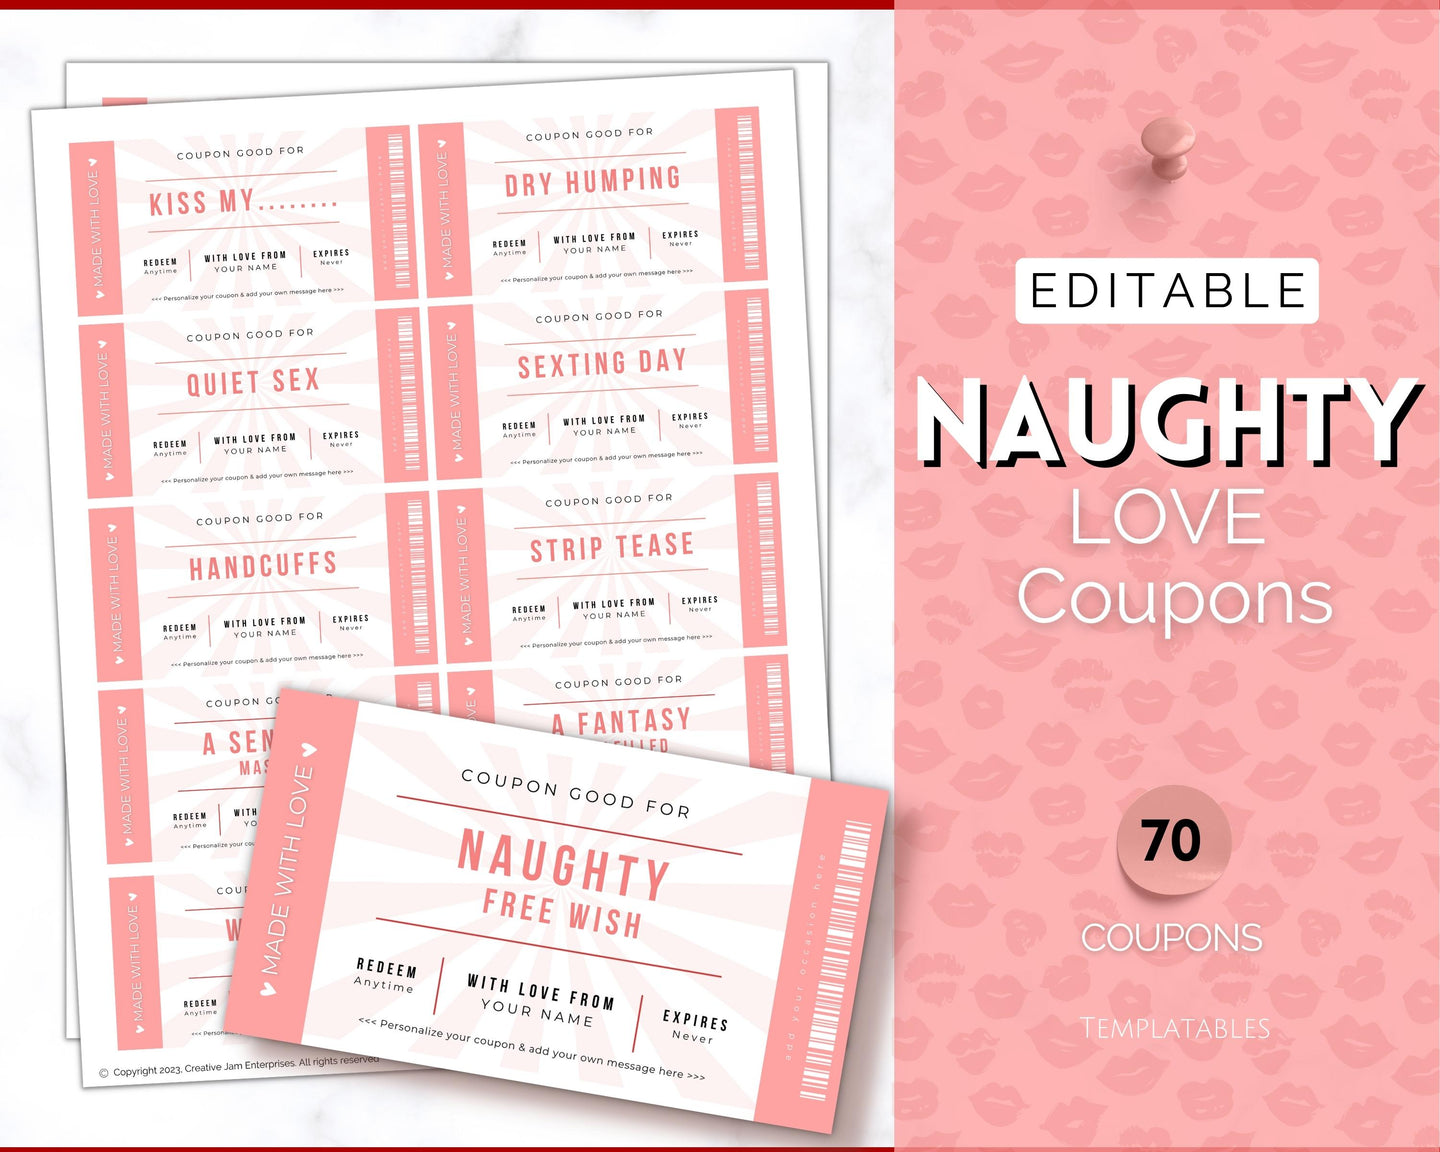 homemade coupons sexual favors